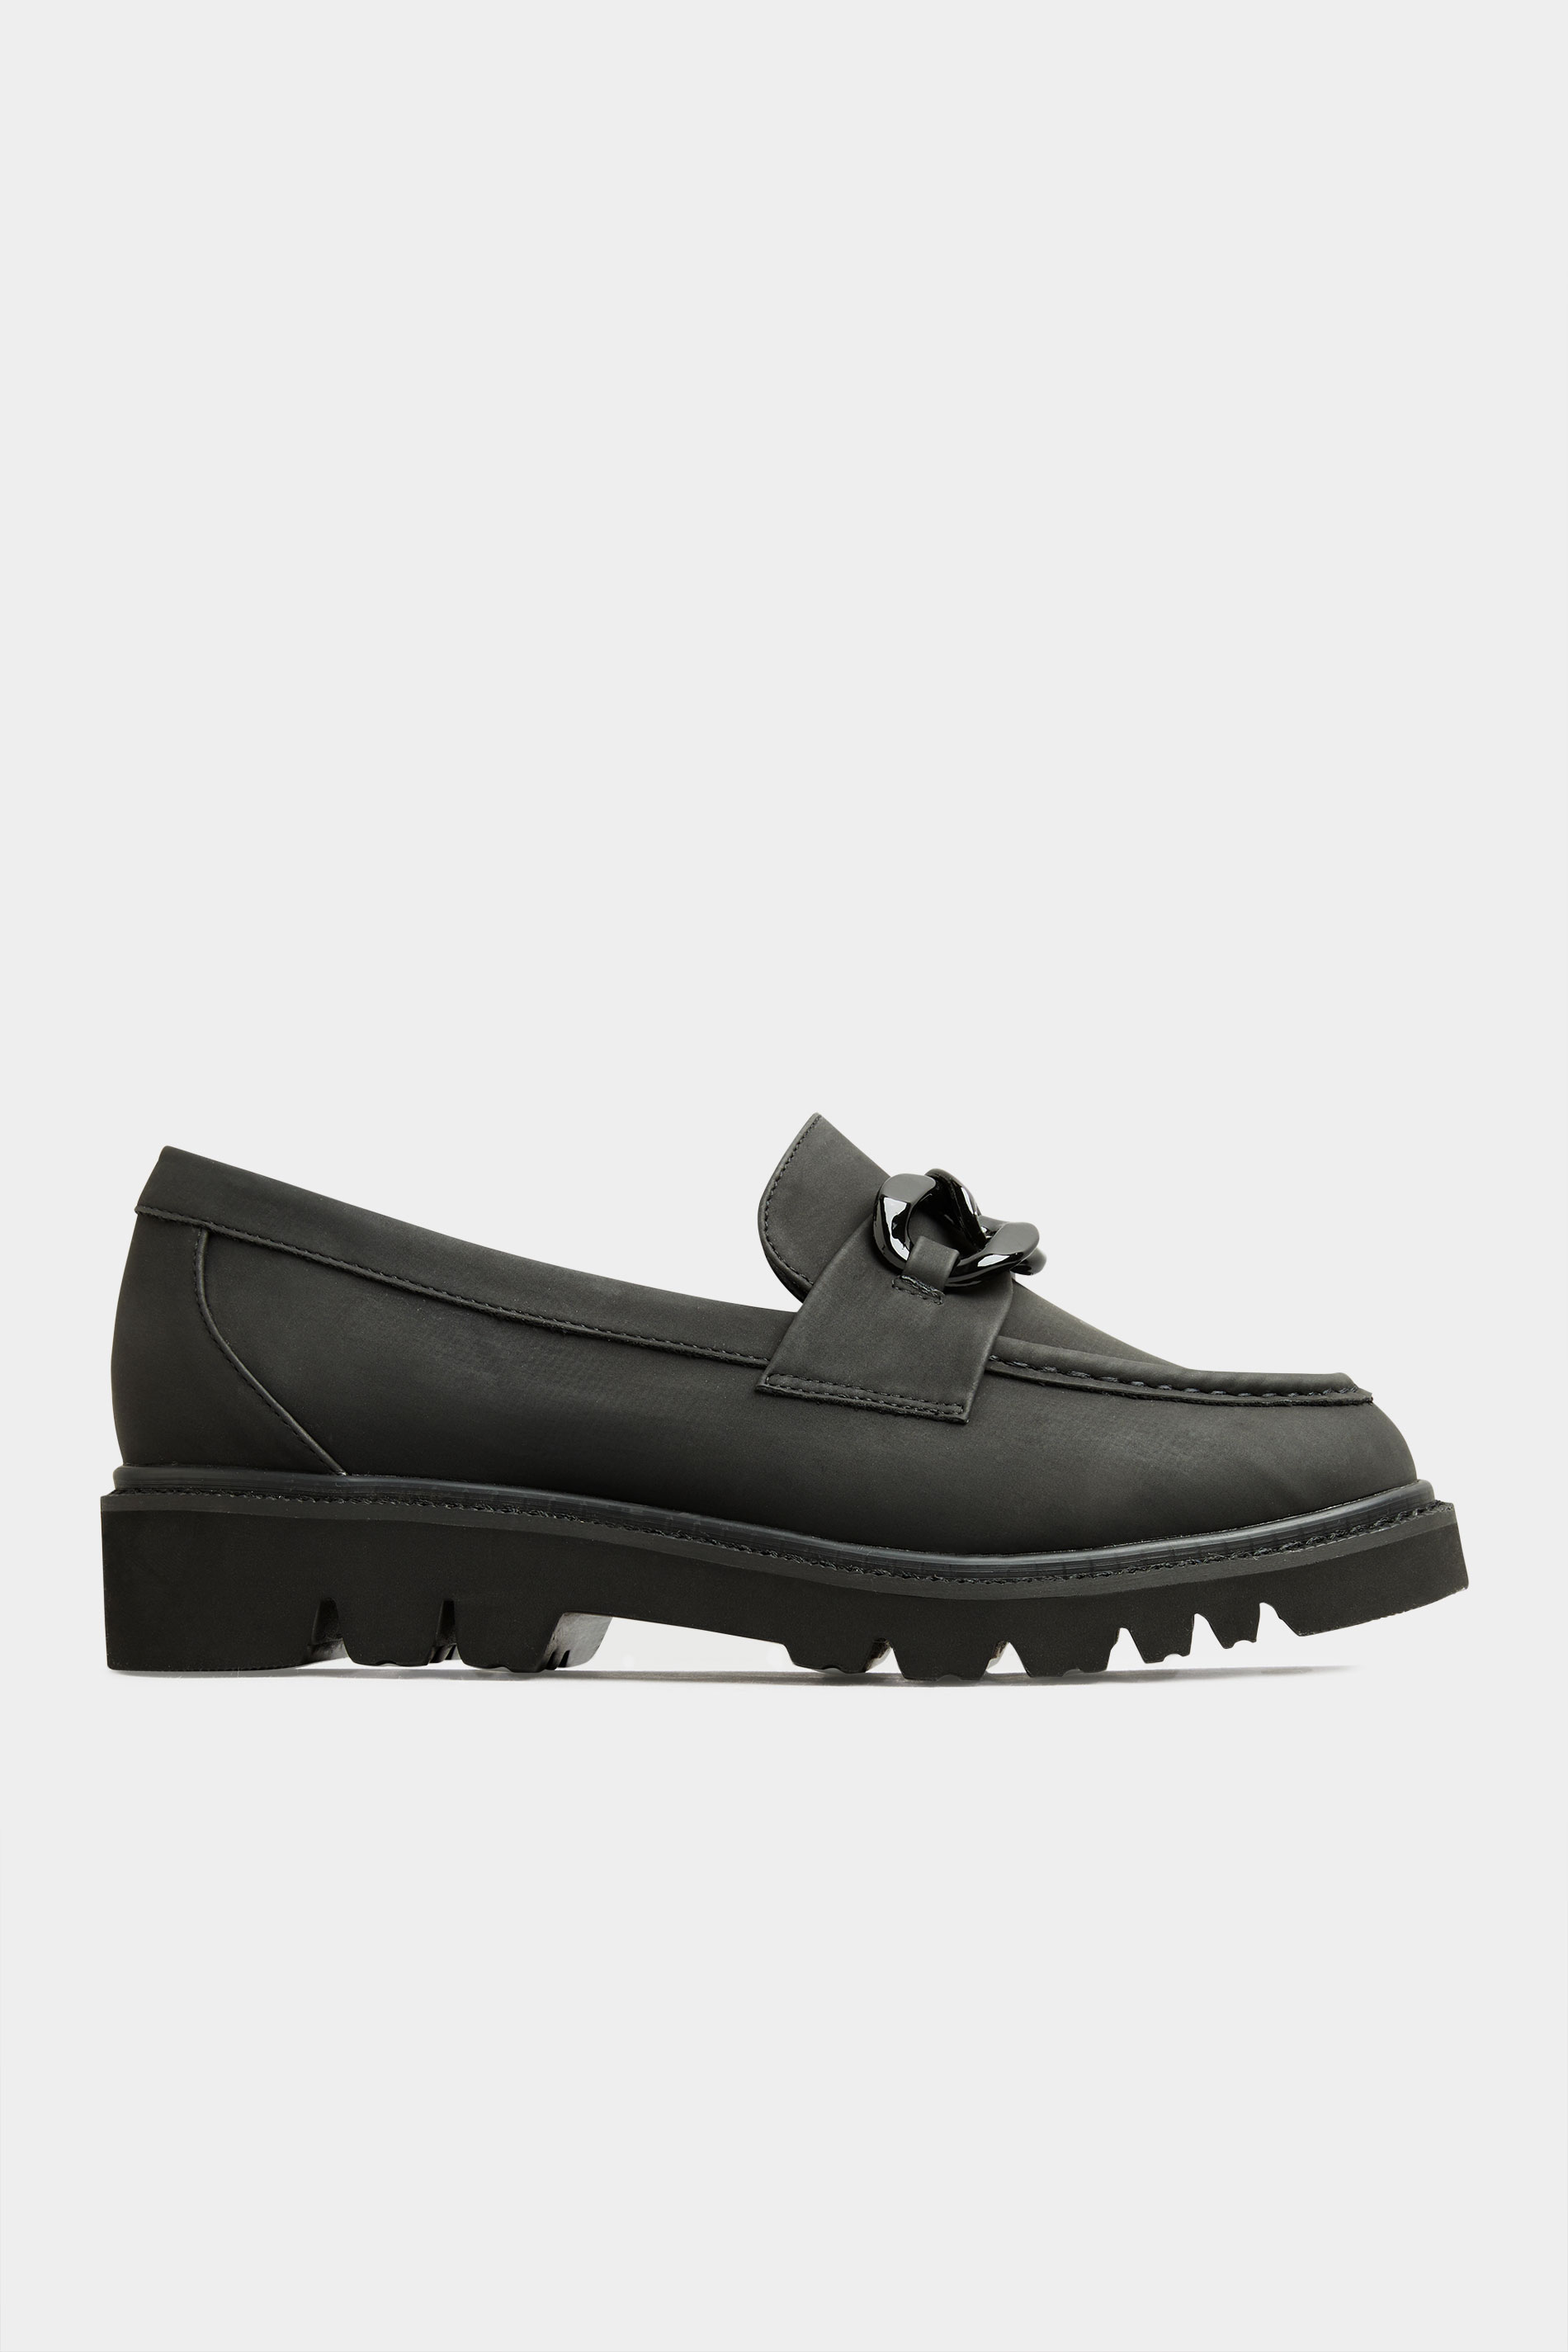 LIMITED COLLECTION Plus Size Black Chunky Chain Loafers In Extra Wide ...